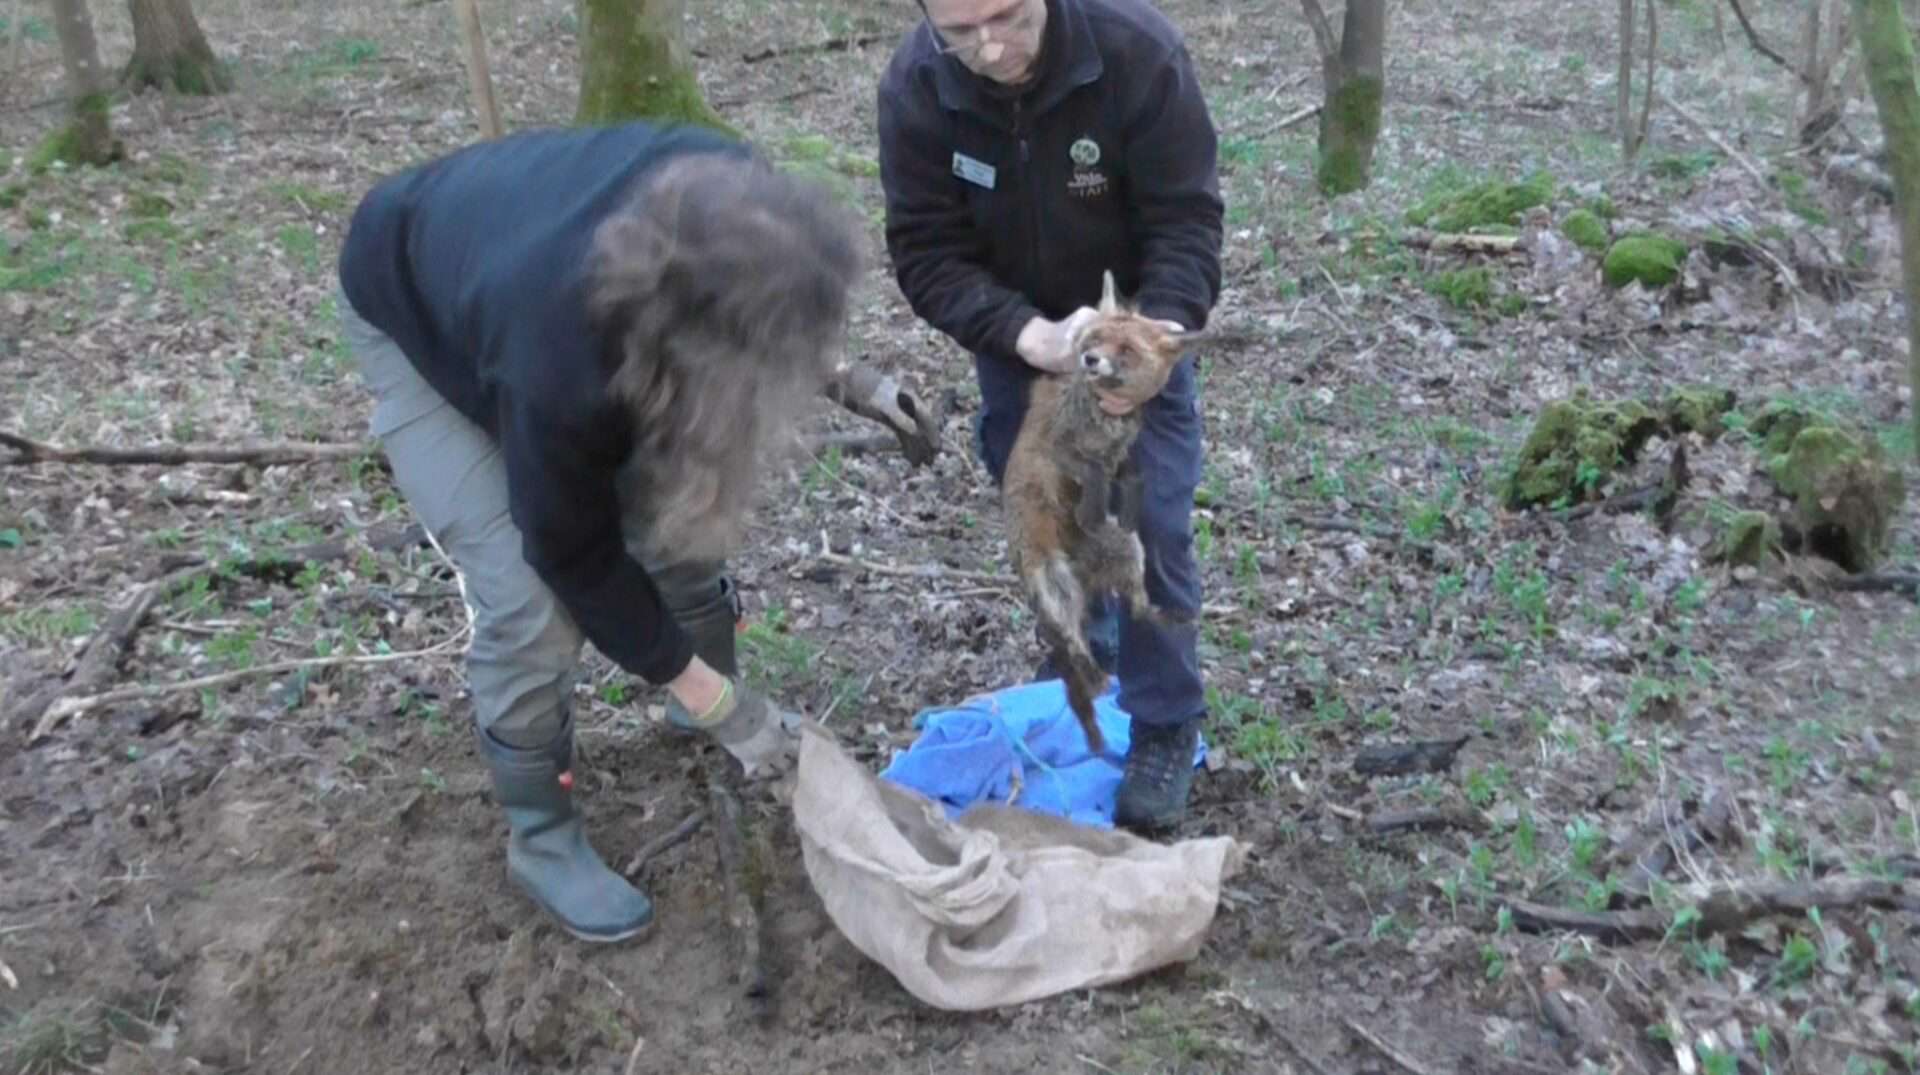 Vixen rescued and released by brave hunt saboteurs.